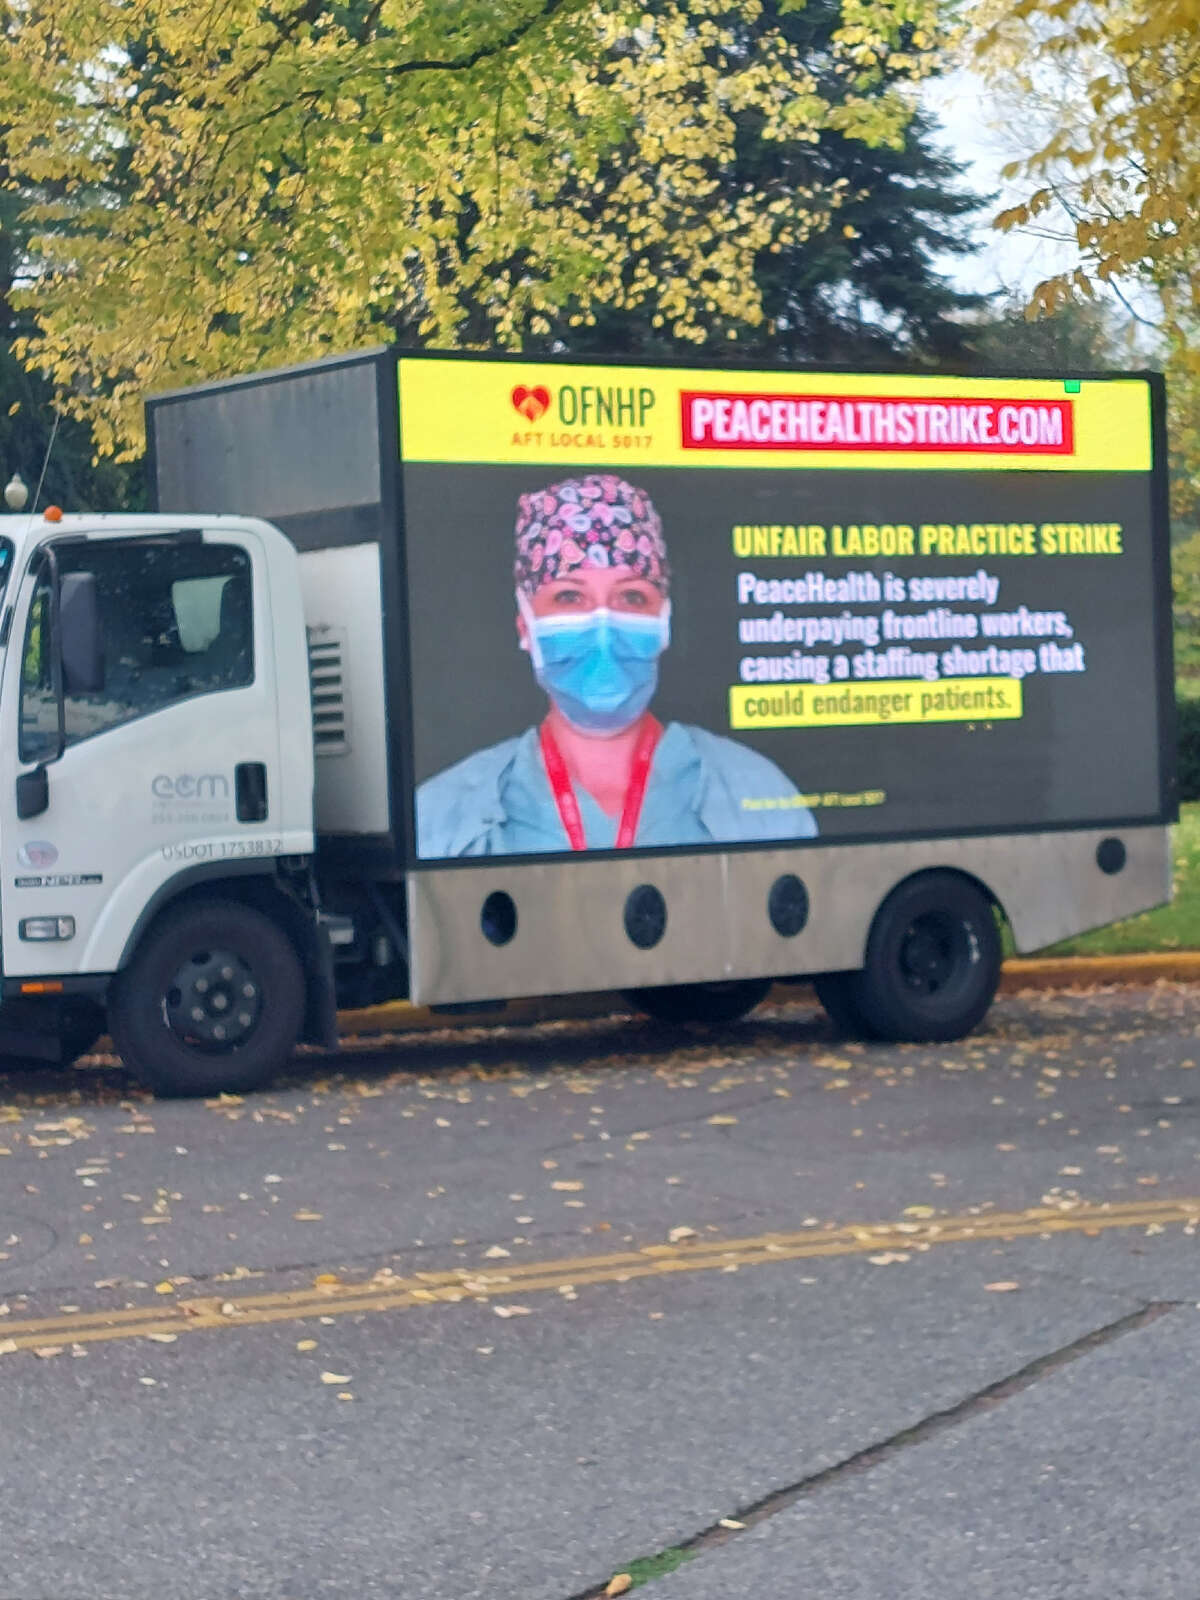 A truck with a screen promoting the unfair labor practice strike by health care workers with PeaceHealth.